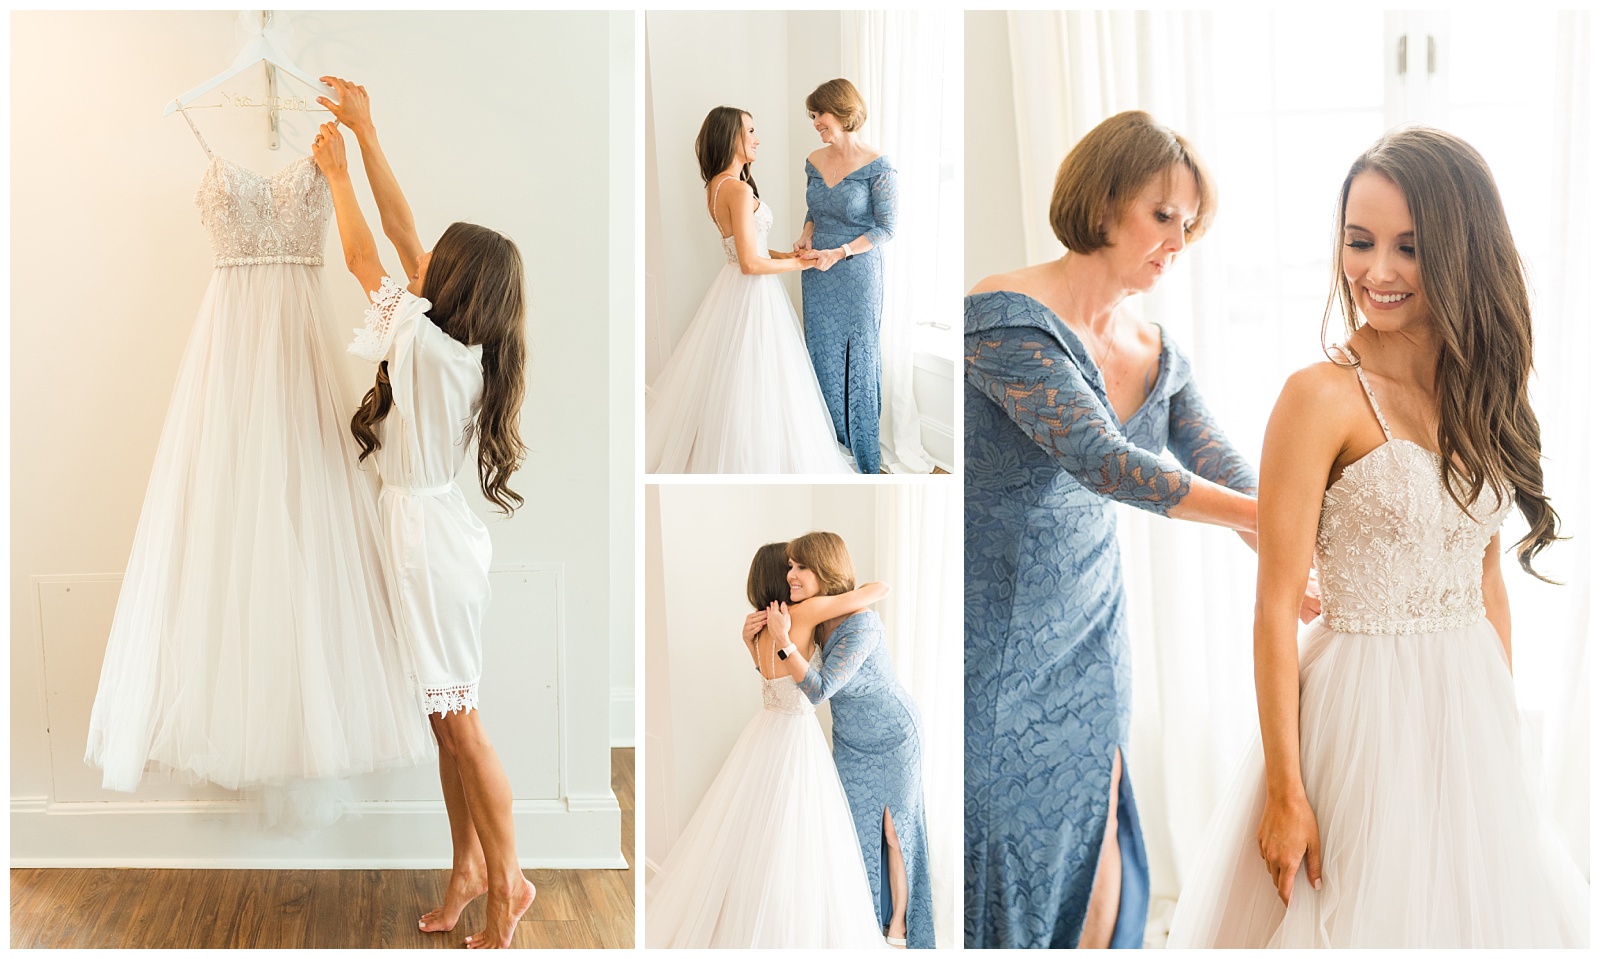 mother and daughter share a sweet moment; a photo series of bride getting in her wedding dress. Photo taken by jenn eddine photography, a greensboro north carolina wedding photographer